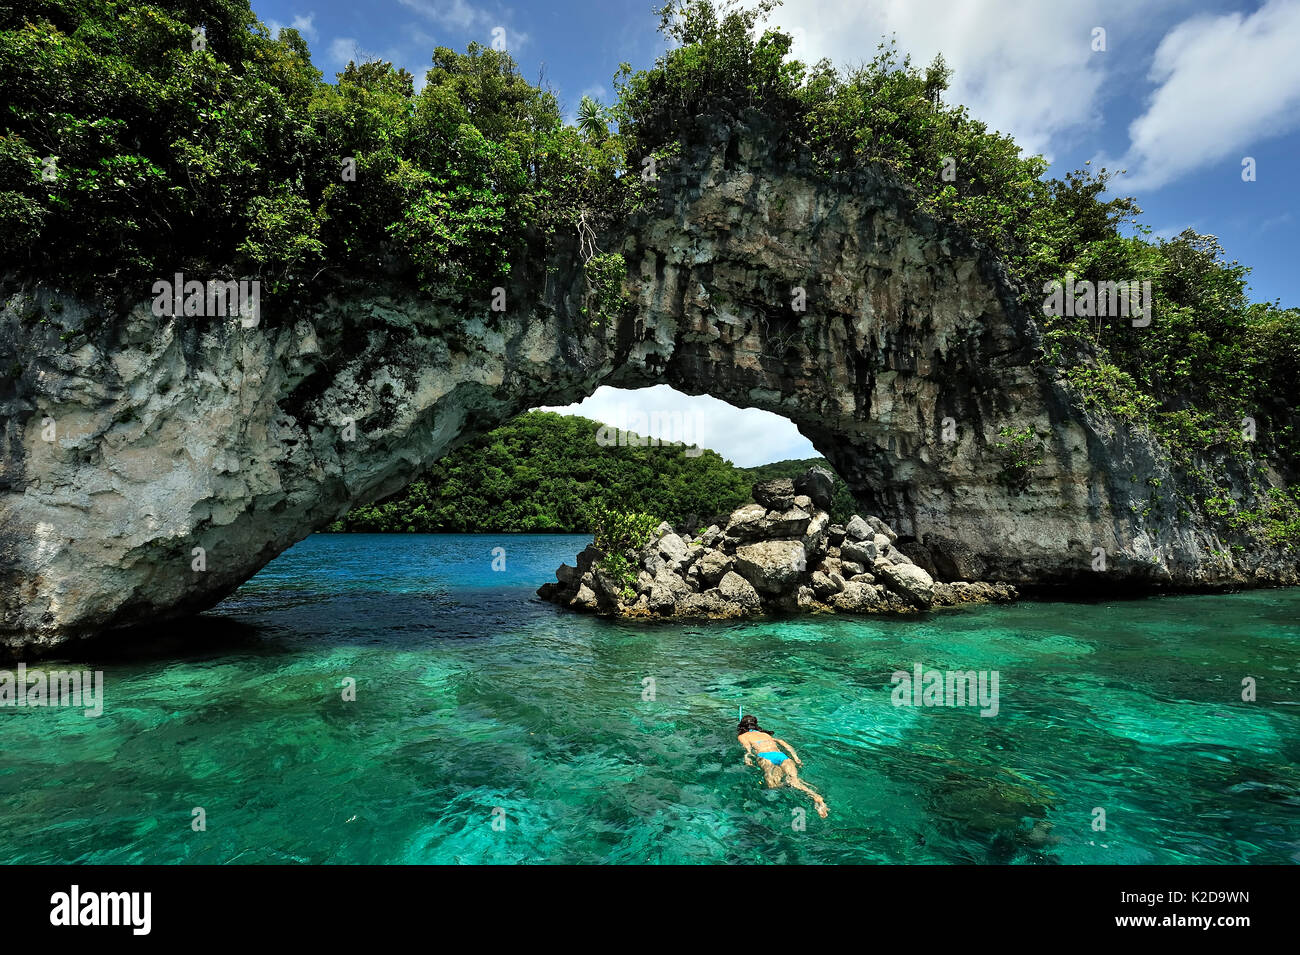 Snorkeler in front of the Arch among the rocky islands, Koror, Palau, Philippine Sea Stock Photo